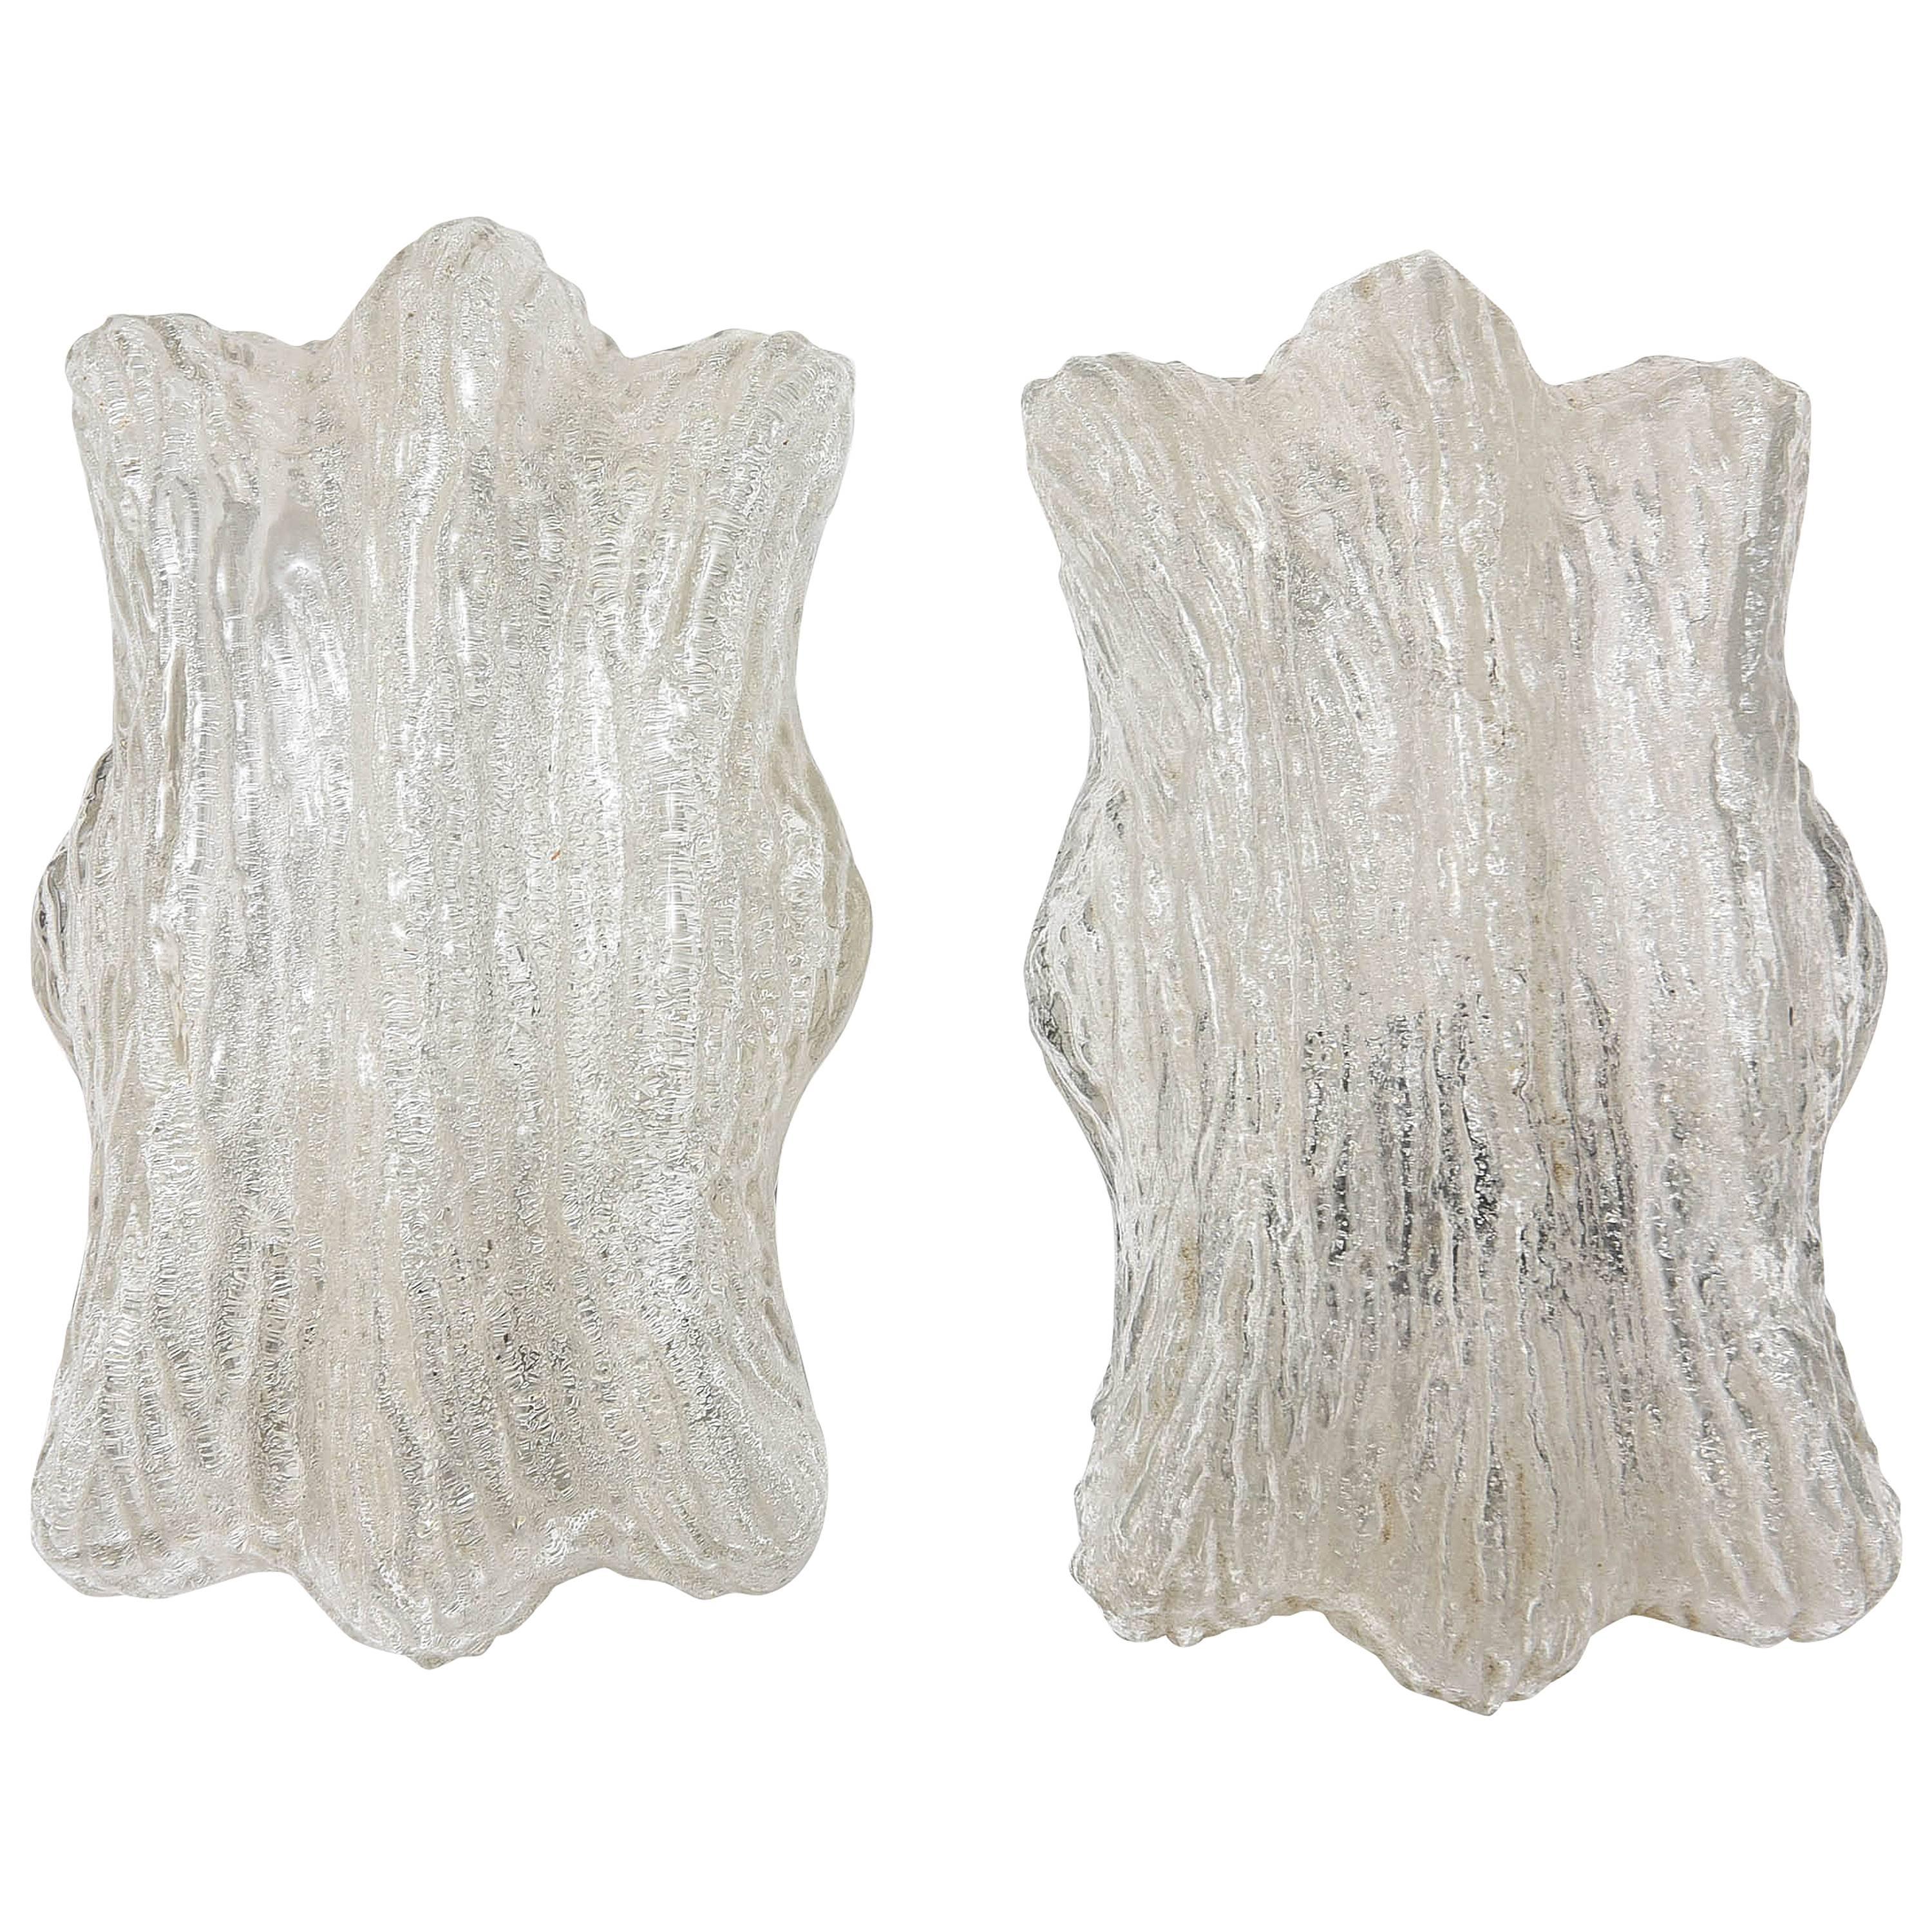 Pair of Mid-Century Modern Faux-Bois Glass Wall Sconces, Germany, 1960s